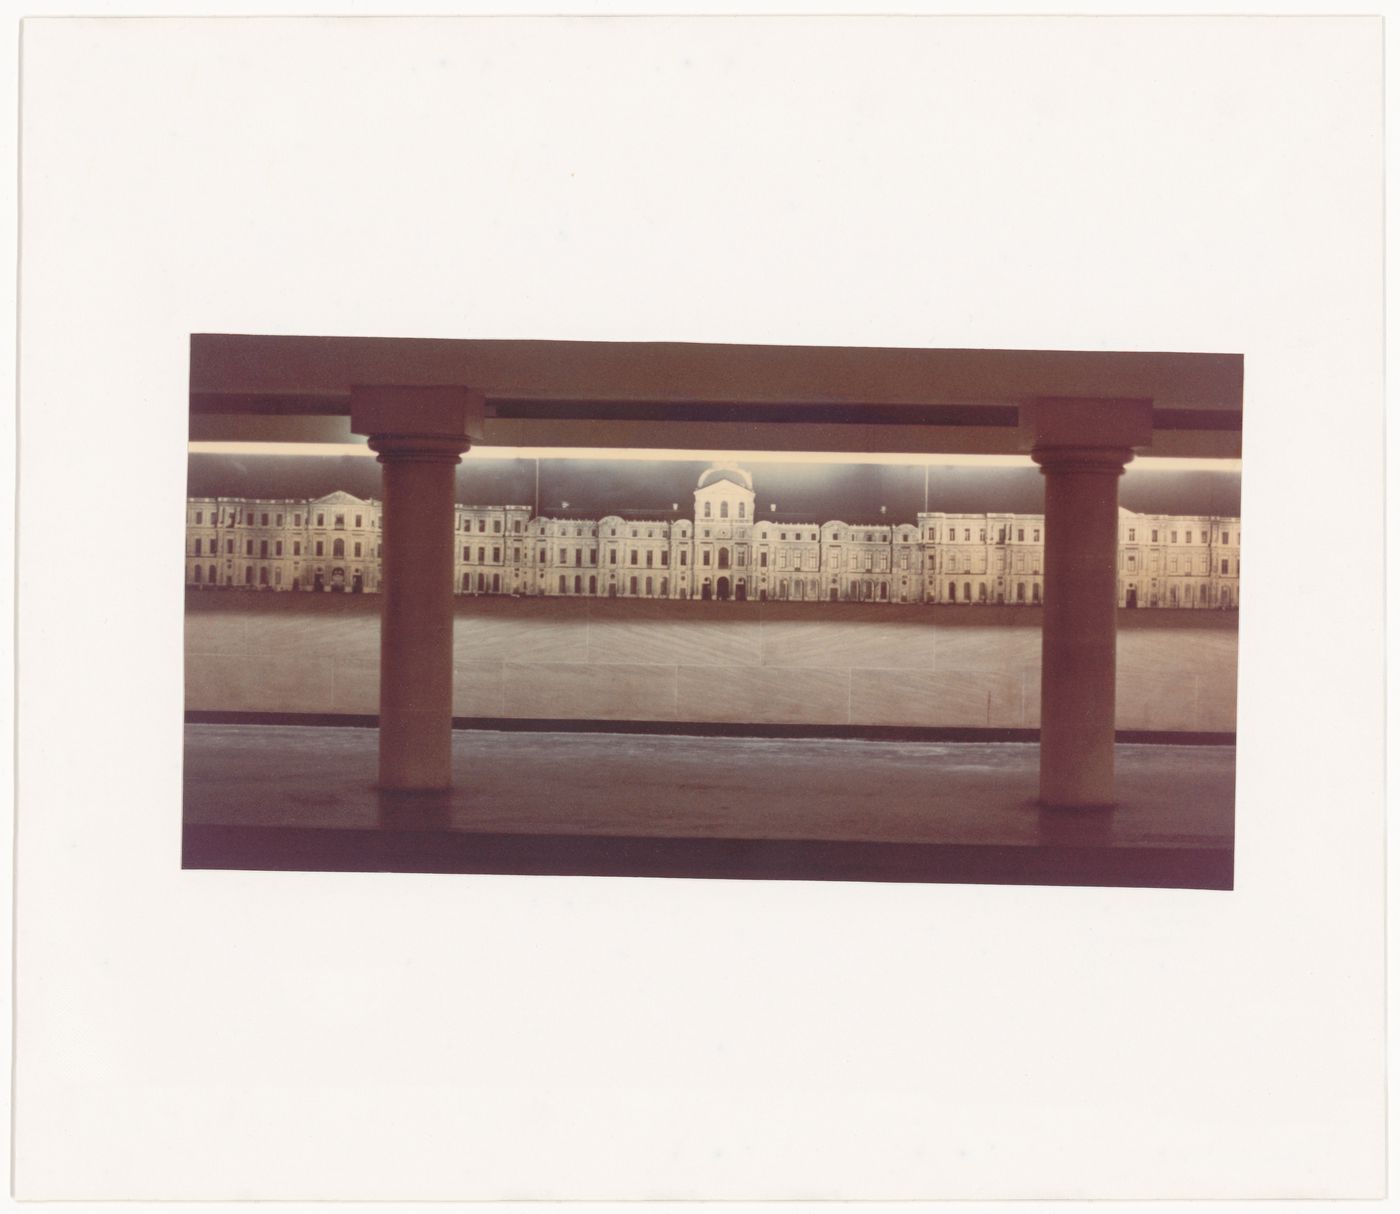 Paris (From "Topography-Iconography", 1980-1981)